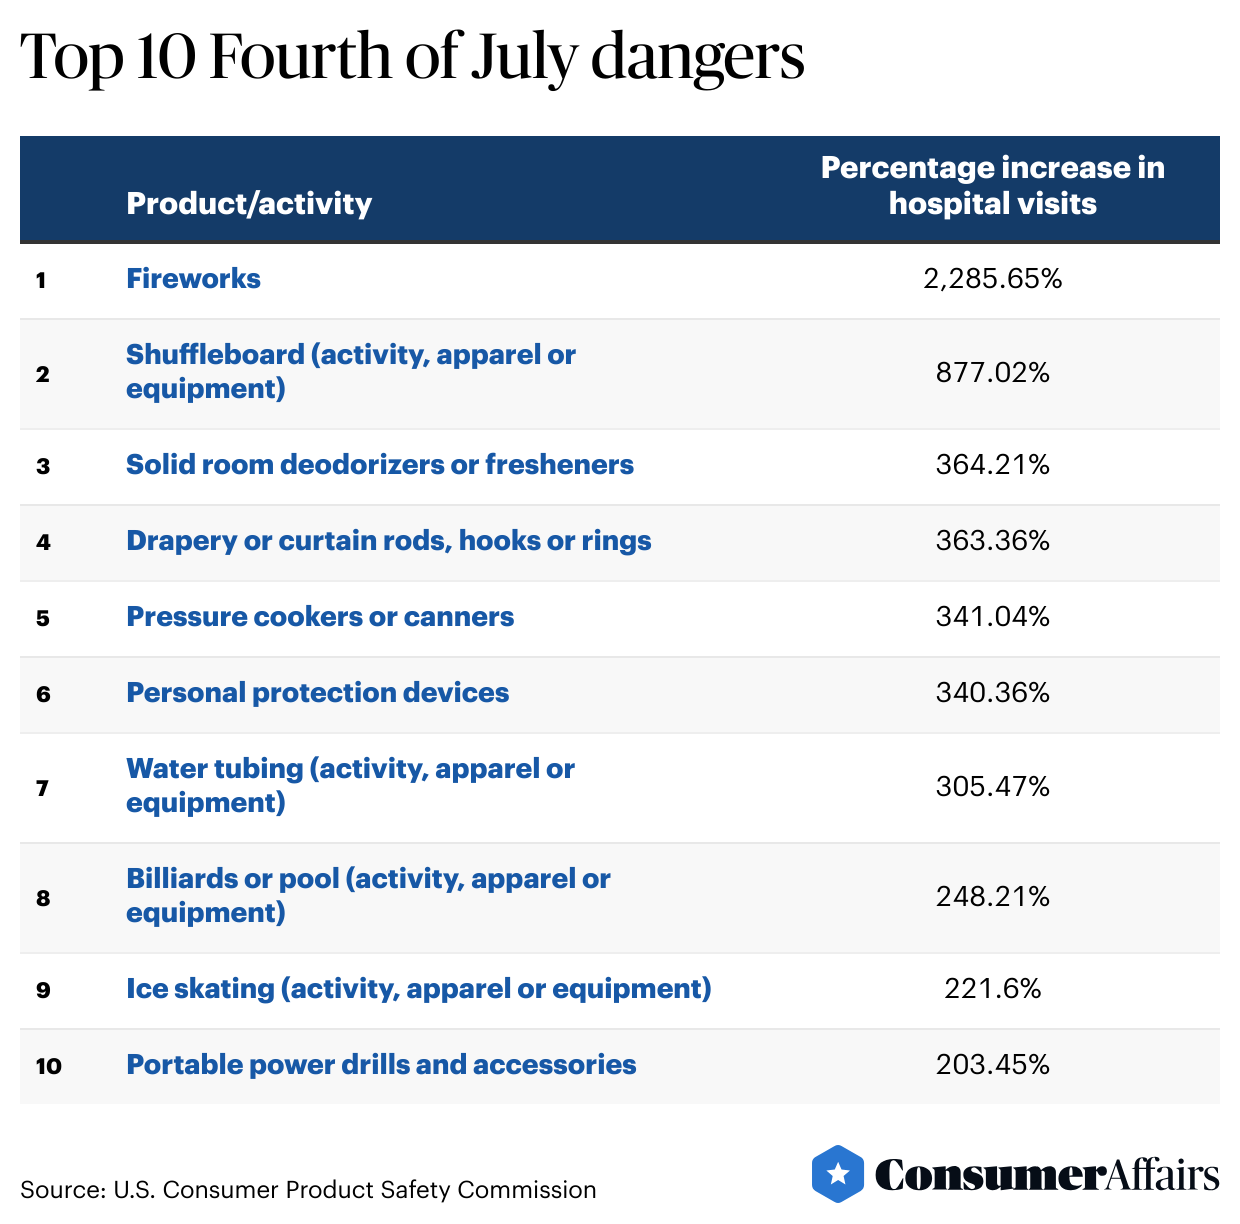 Table listing the product/activity and hospital visit percentages for the “Top 10 Fourth of July dangers”.